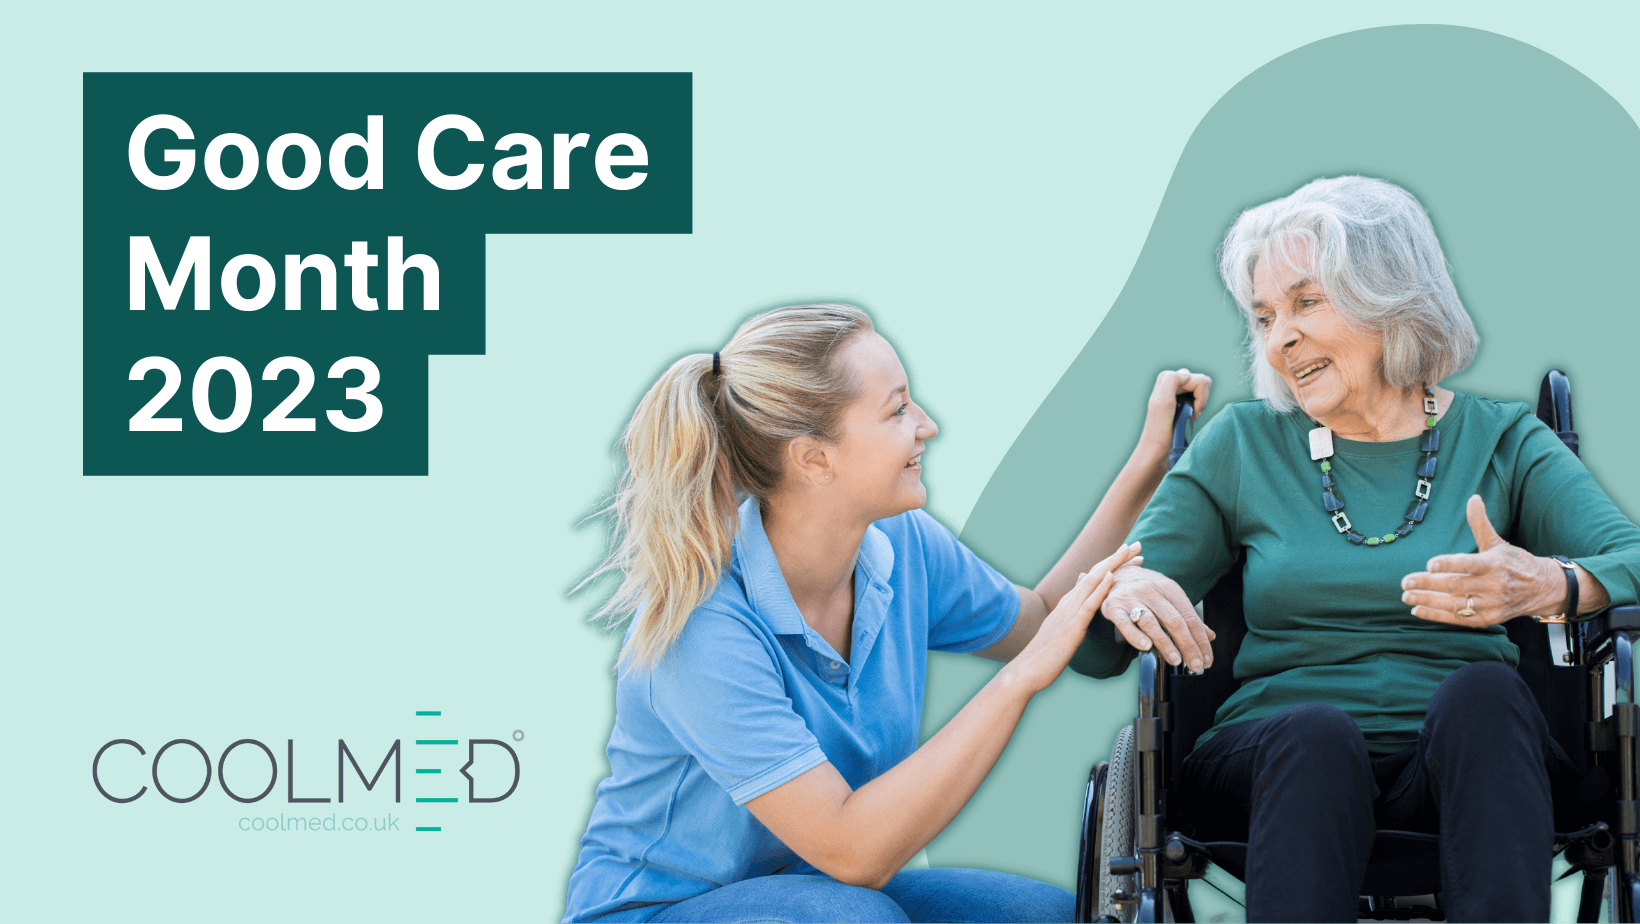 Good Care Month and the need for medical fridges within care homes graphic by CoolMed. The graphic shows a young female carer talking to an elderly woman in a wheelchair.